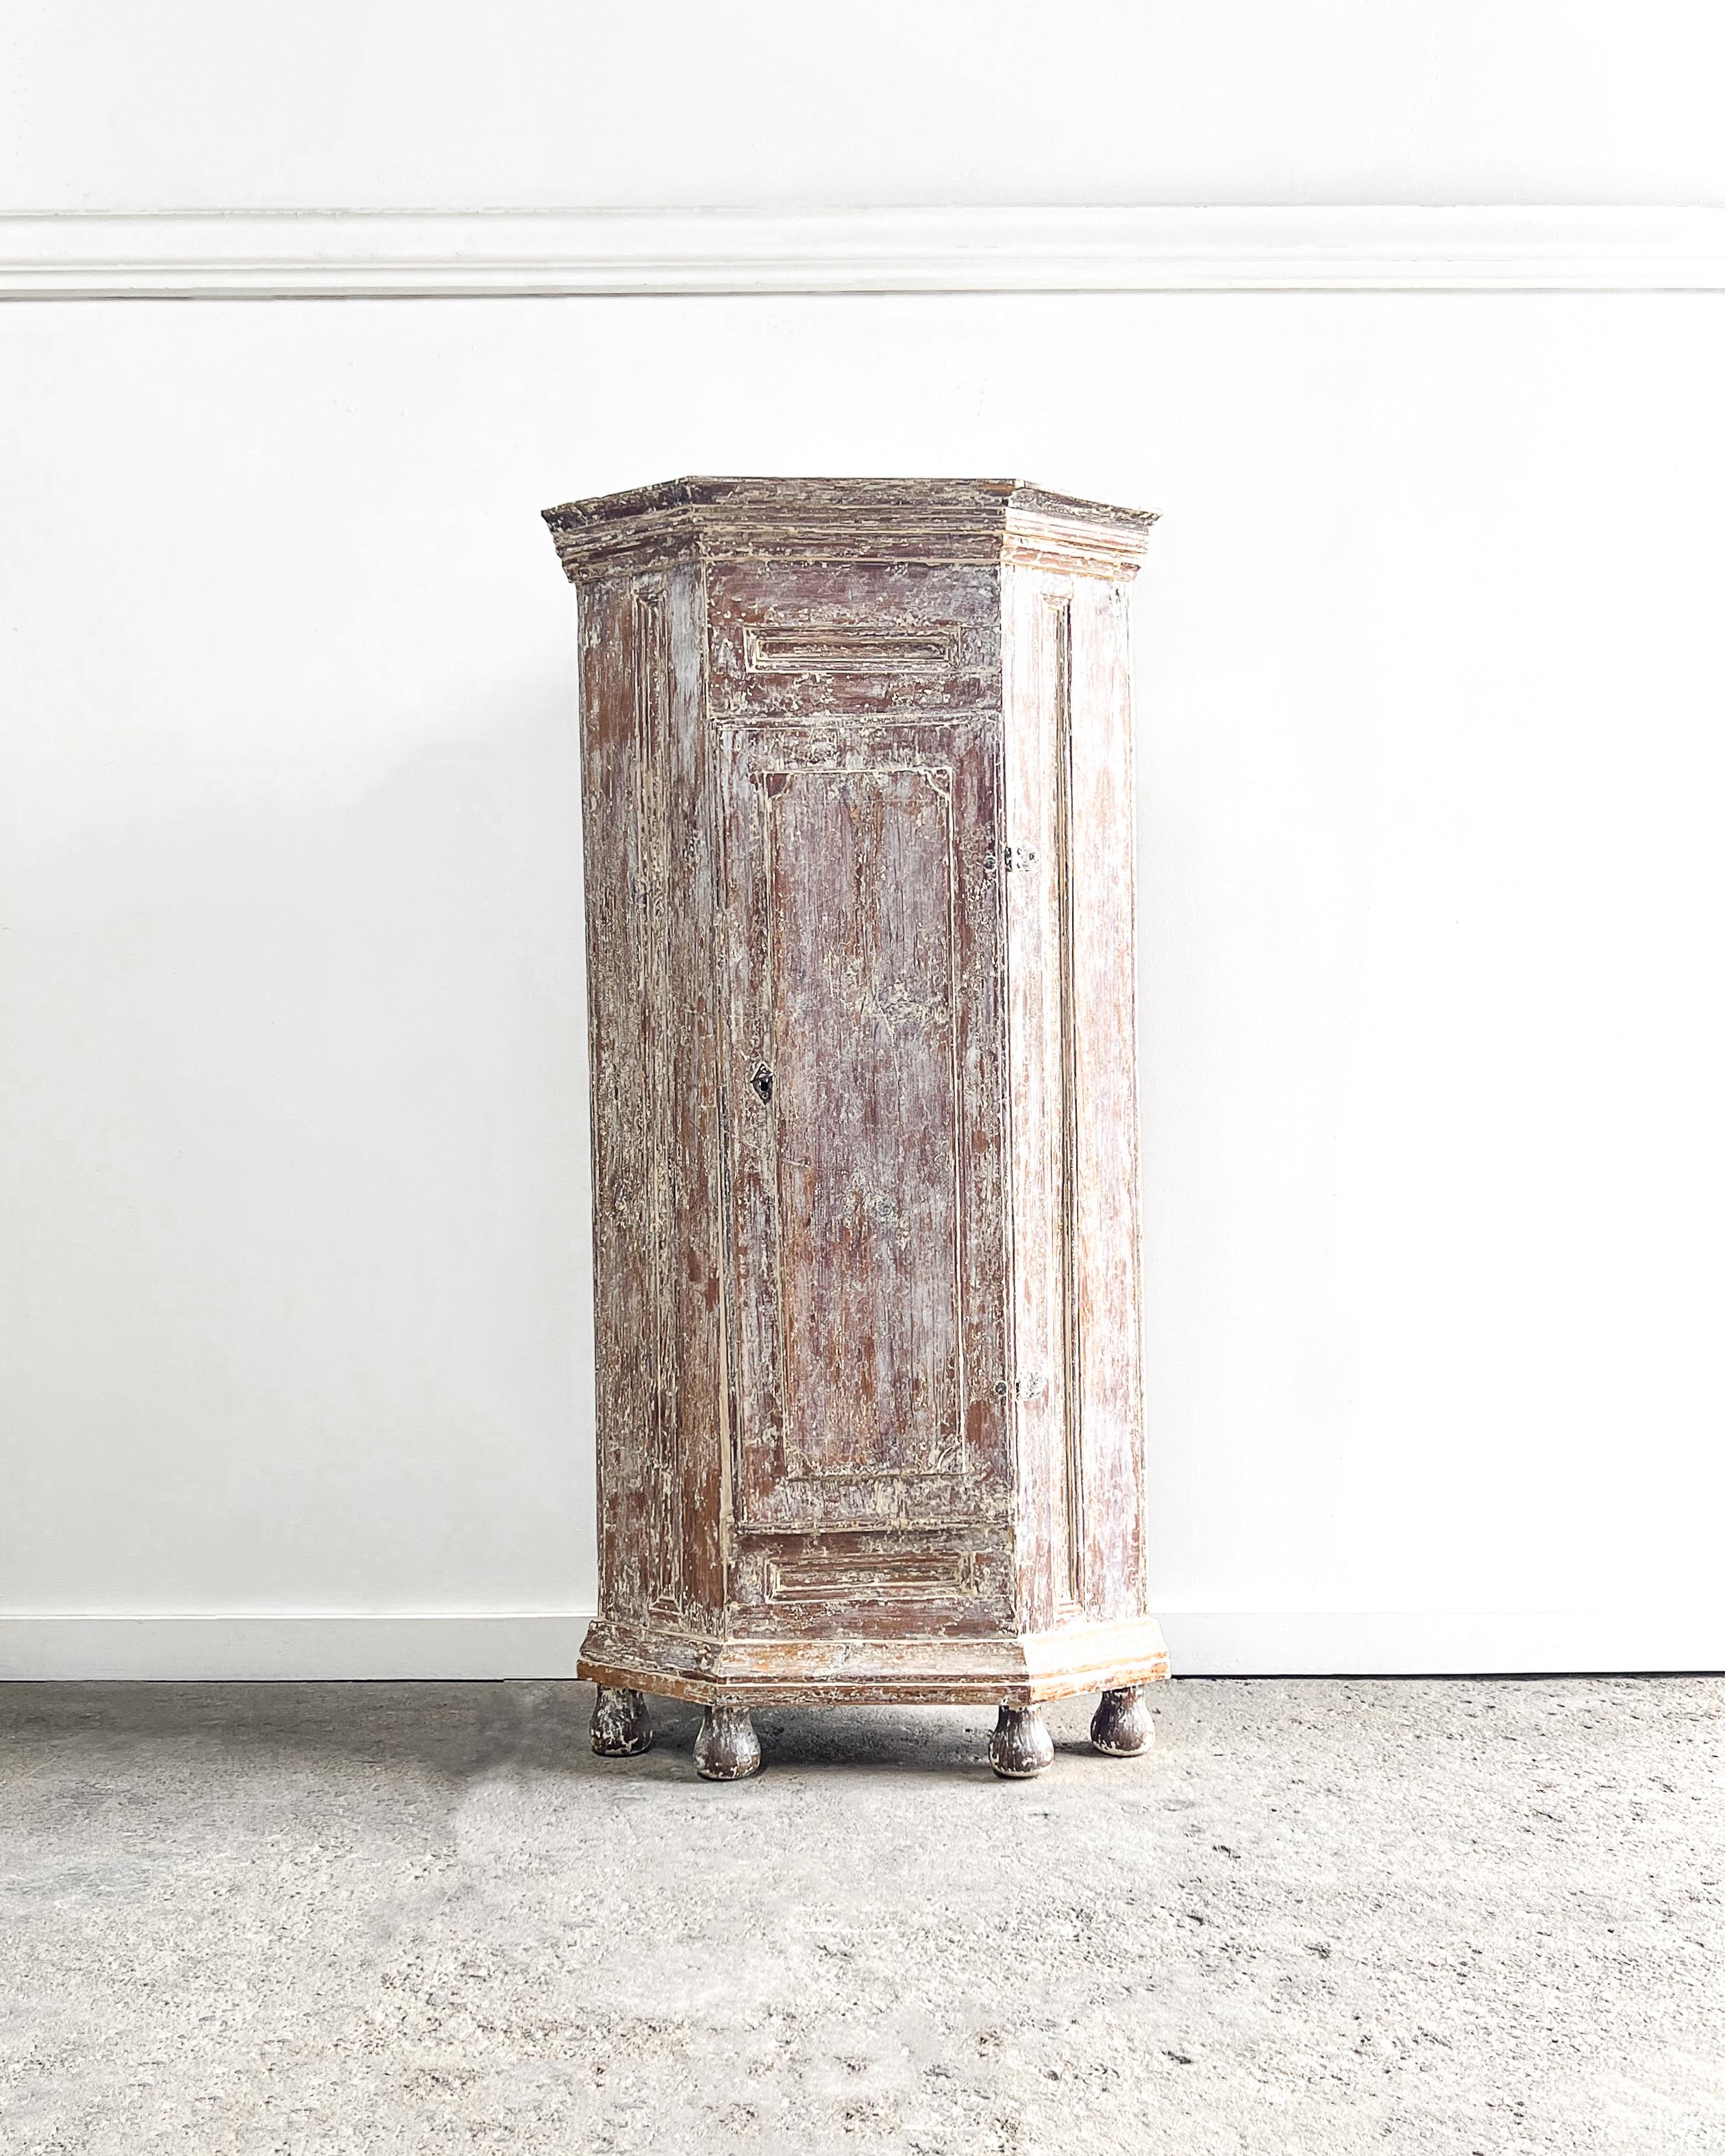 A lovely Swedish encoignure (corner) cabinet has a single door that opens to reveal three shelves. 

The cabinet features a beautiful dry-scraped finish having layers of the original creamy white and blue-gray paint revealing areas of the natural